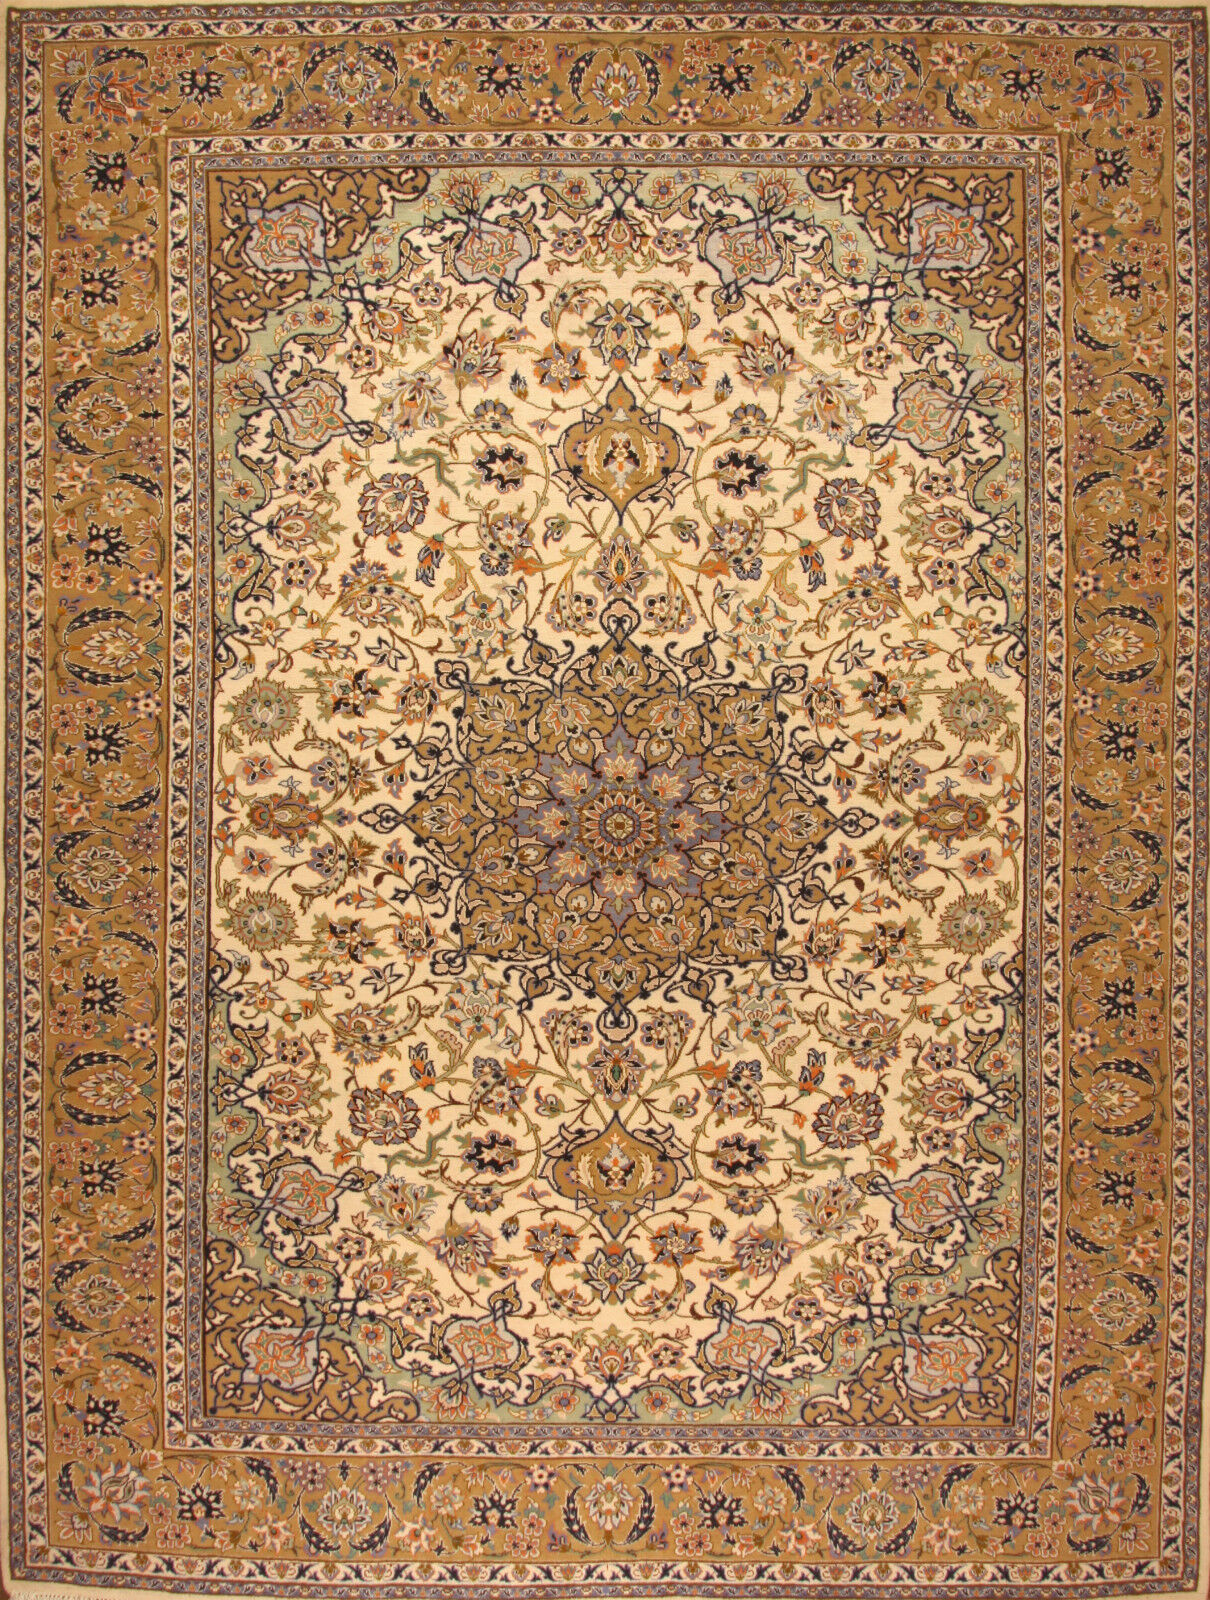 Handmade Contemporary Persian Isfahan Rug in a modern living room setting